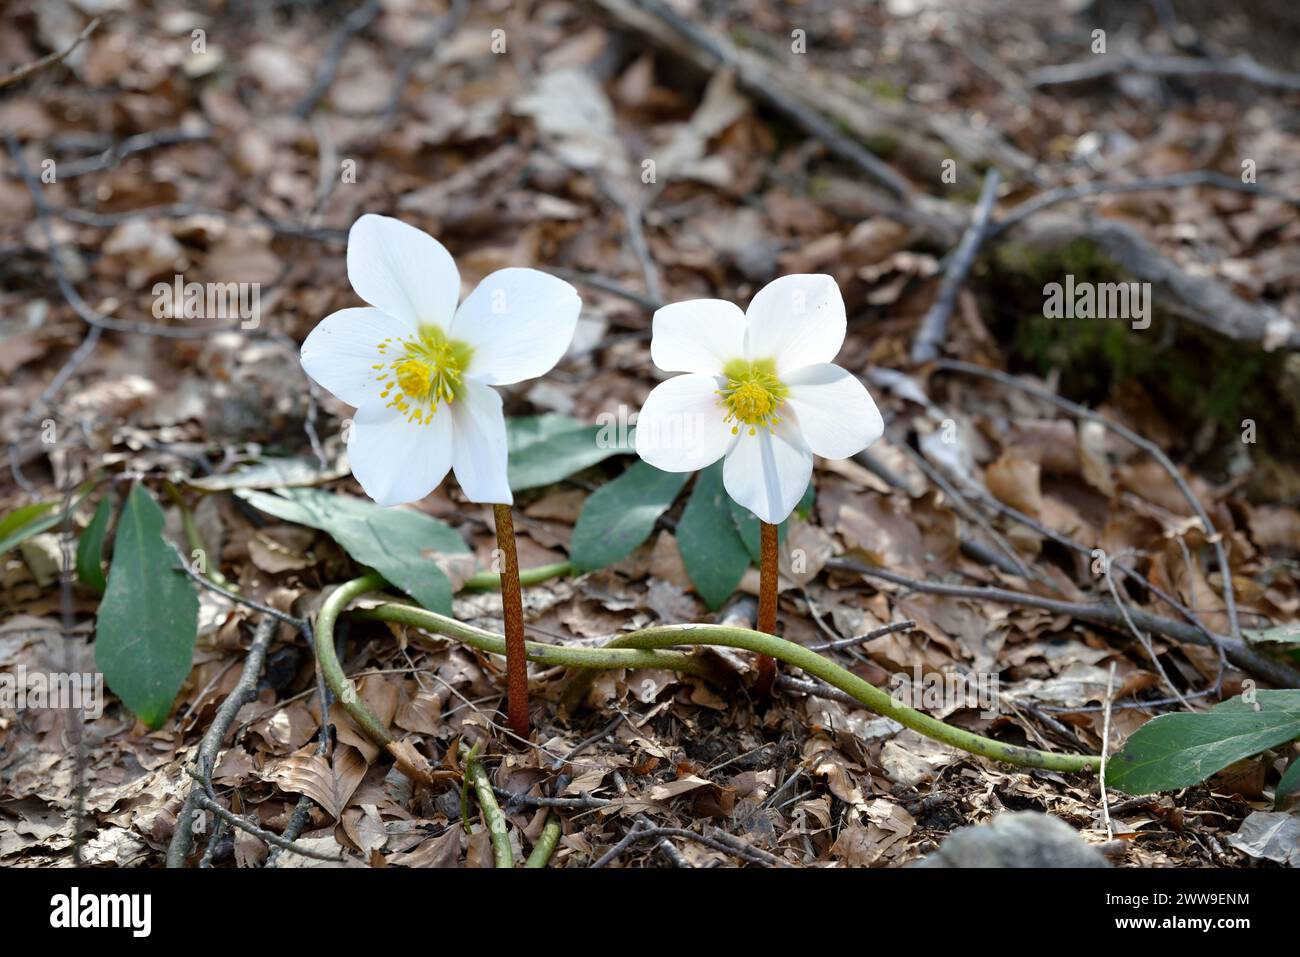 Christmas Rose or Black Hellebore (Helleborus niger) among the leaves of the undergrowth Stock Photo